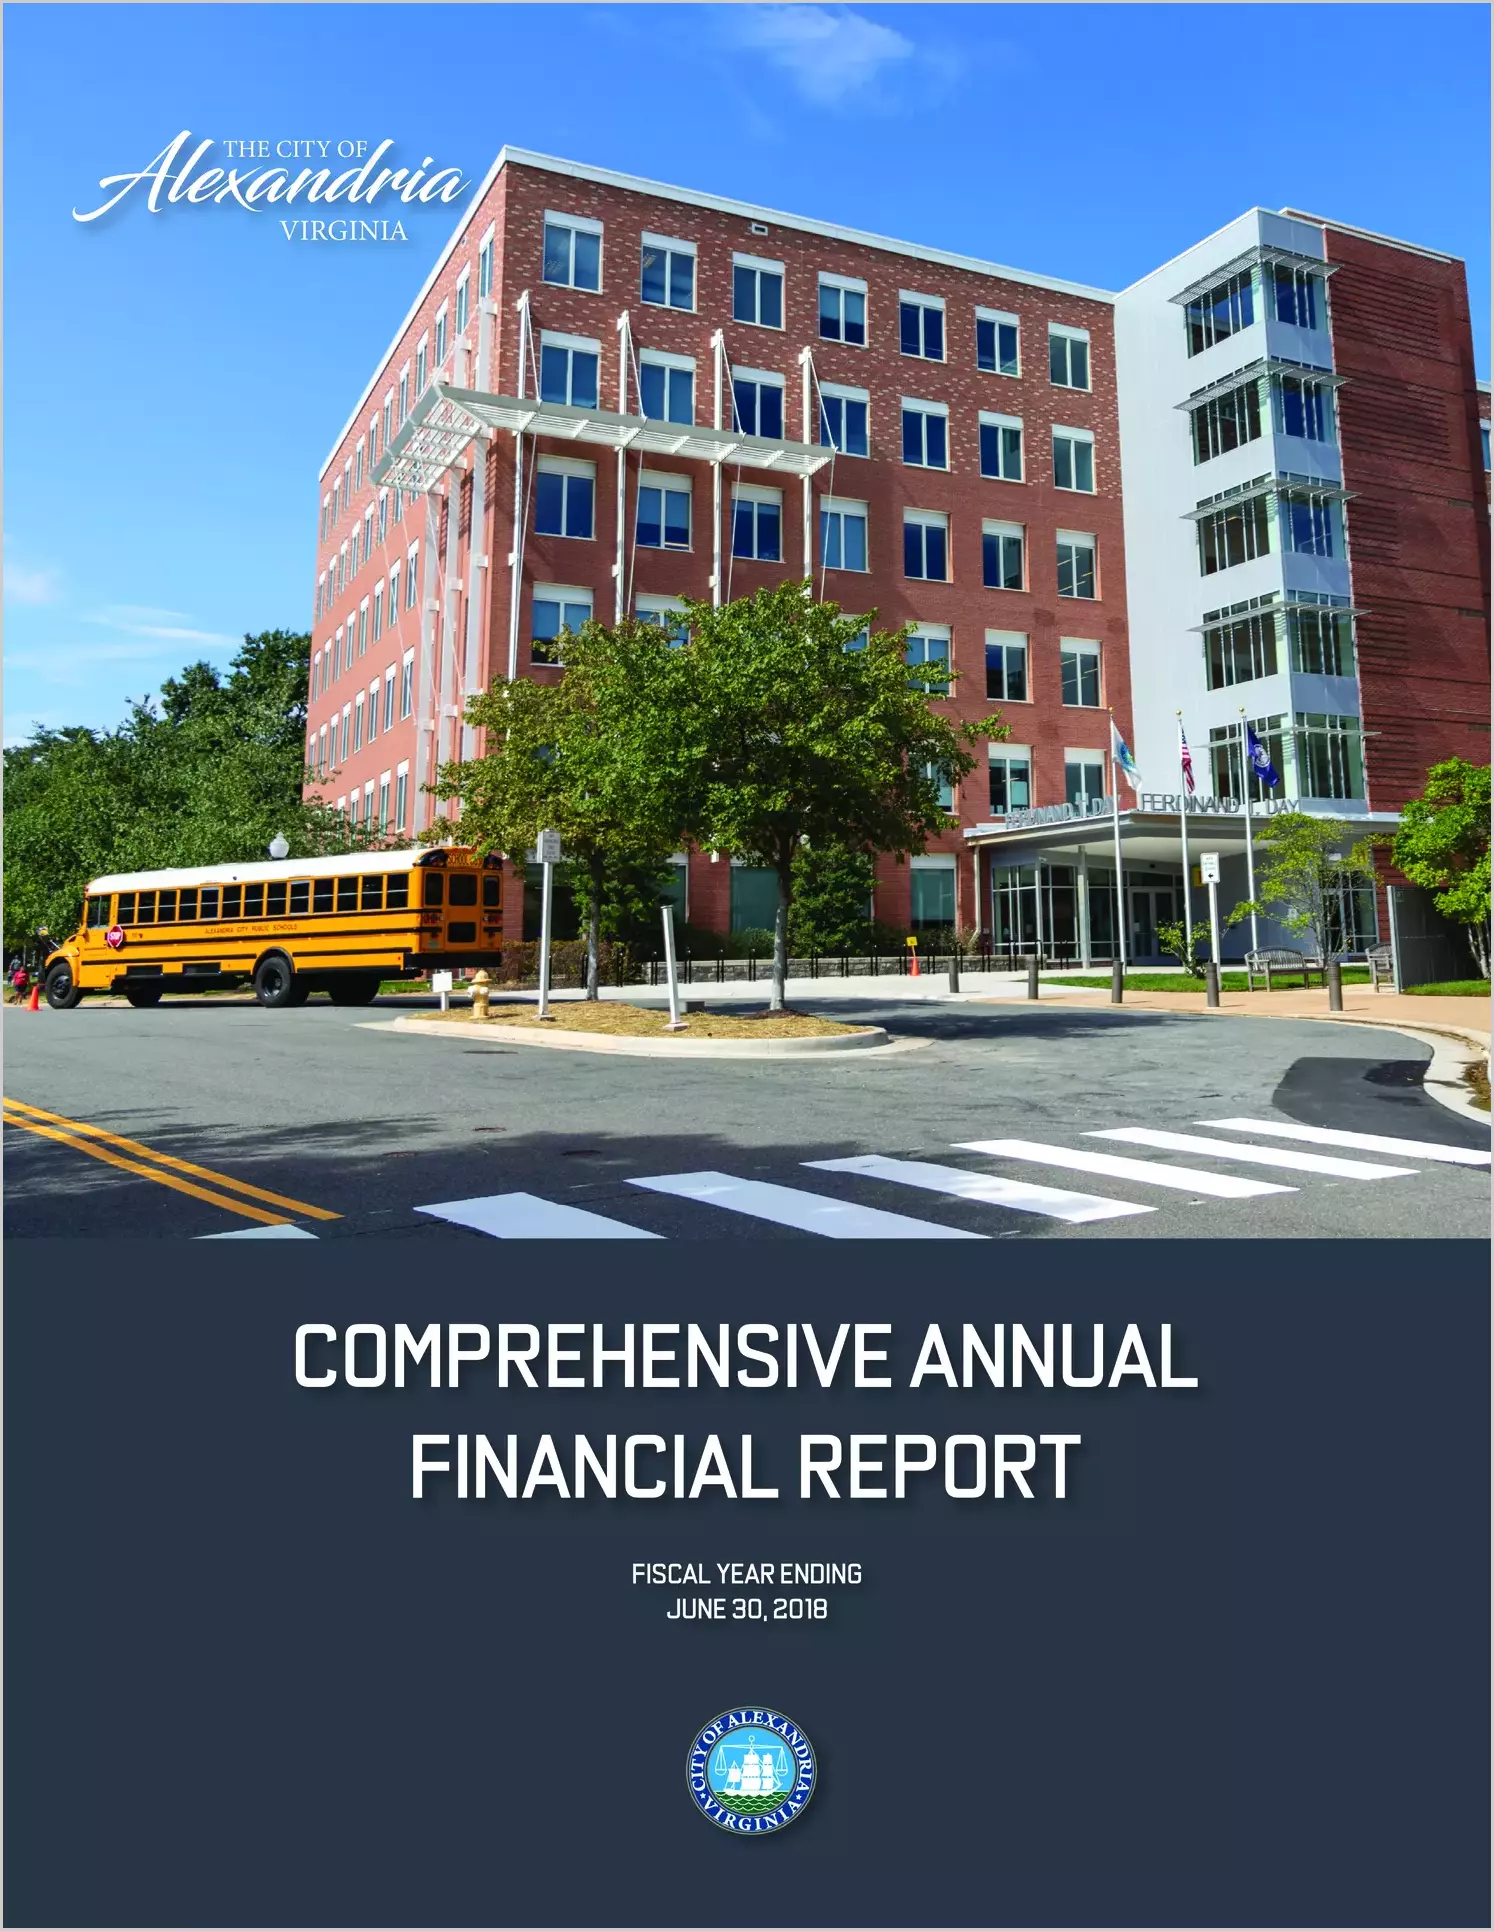 2018 Annual Financial Report for City of Alexandria